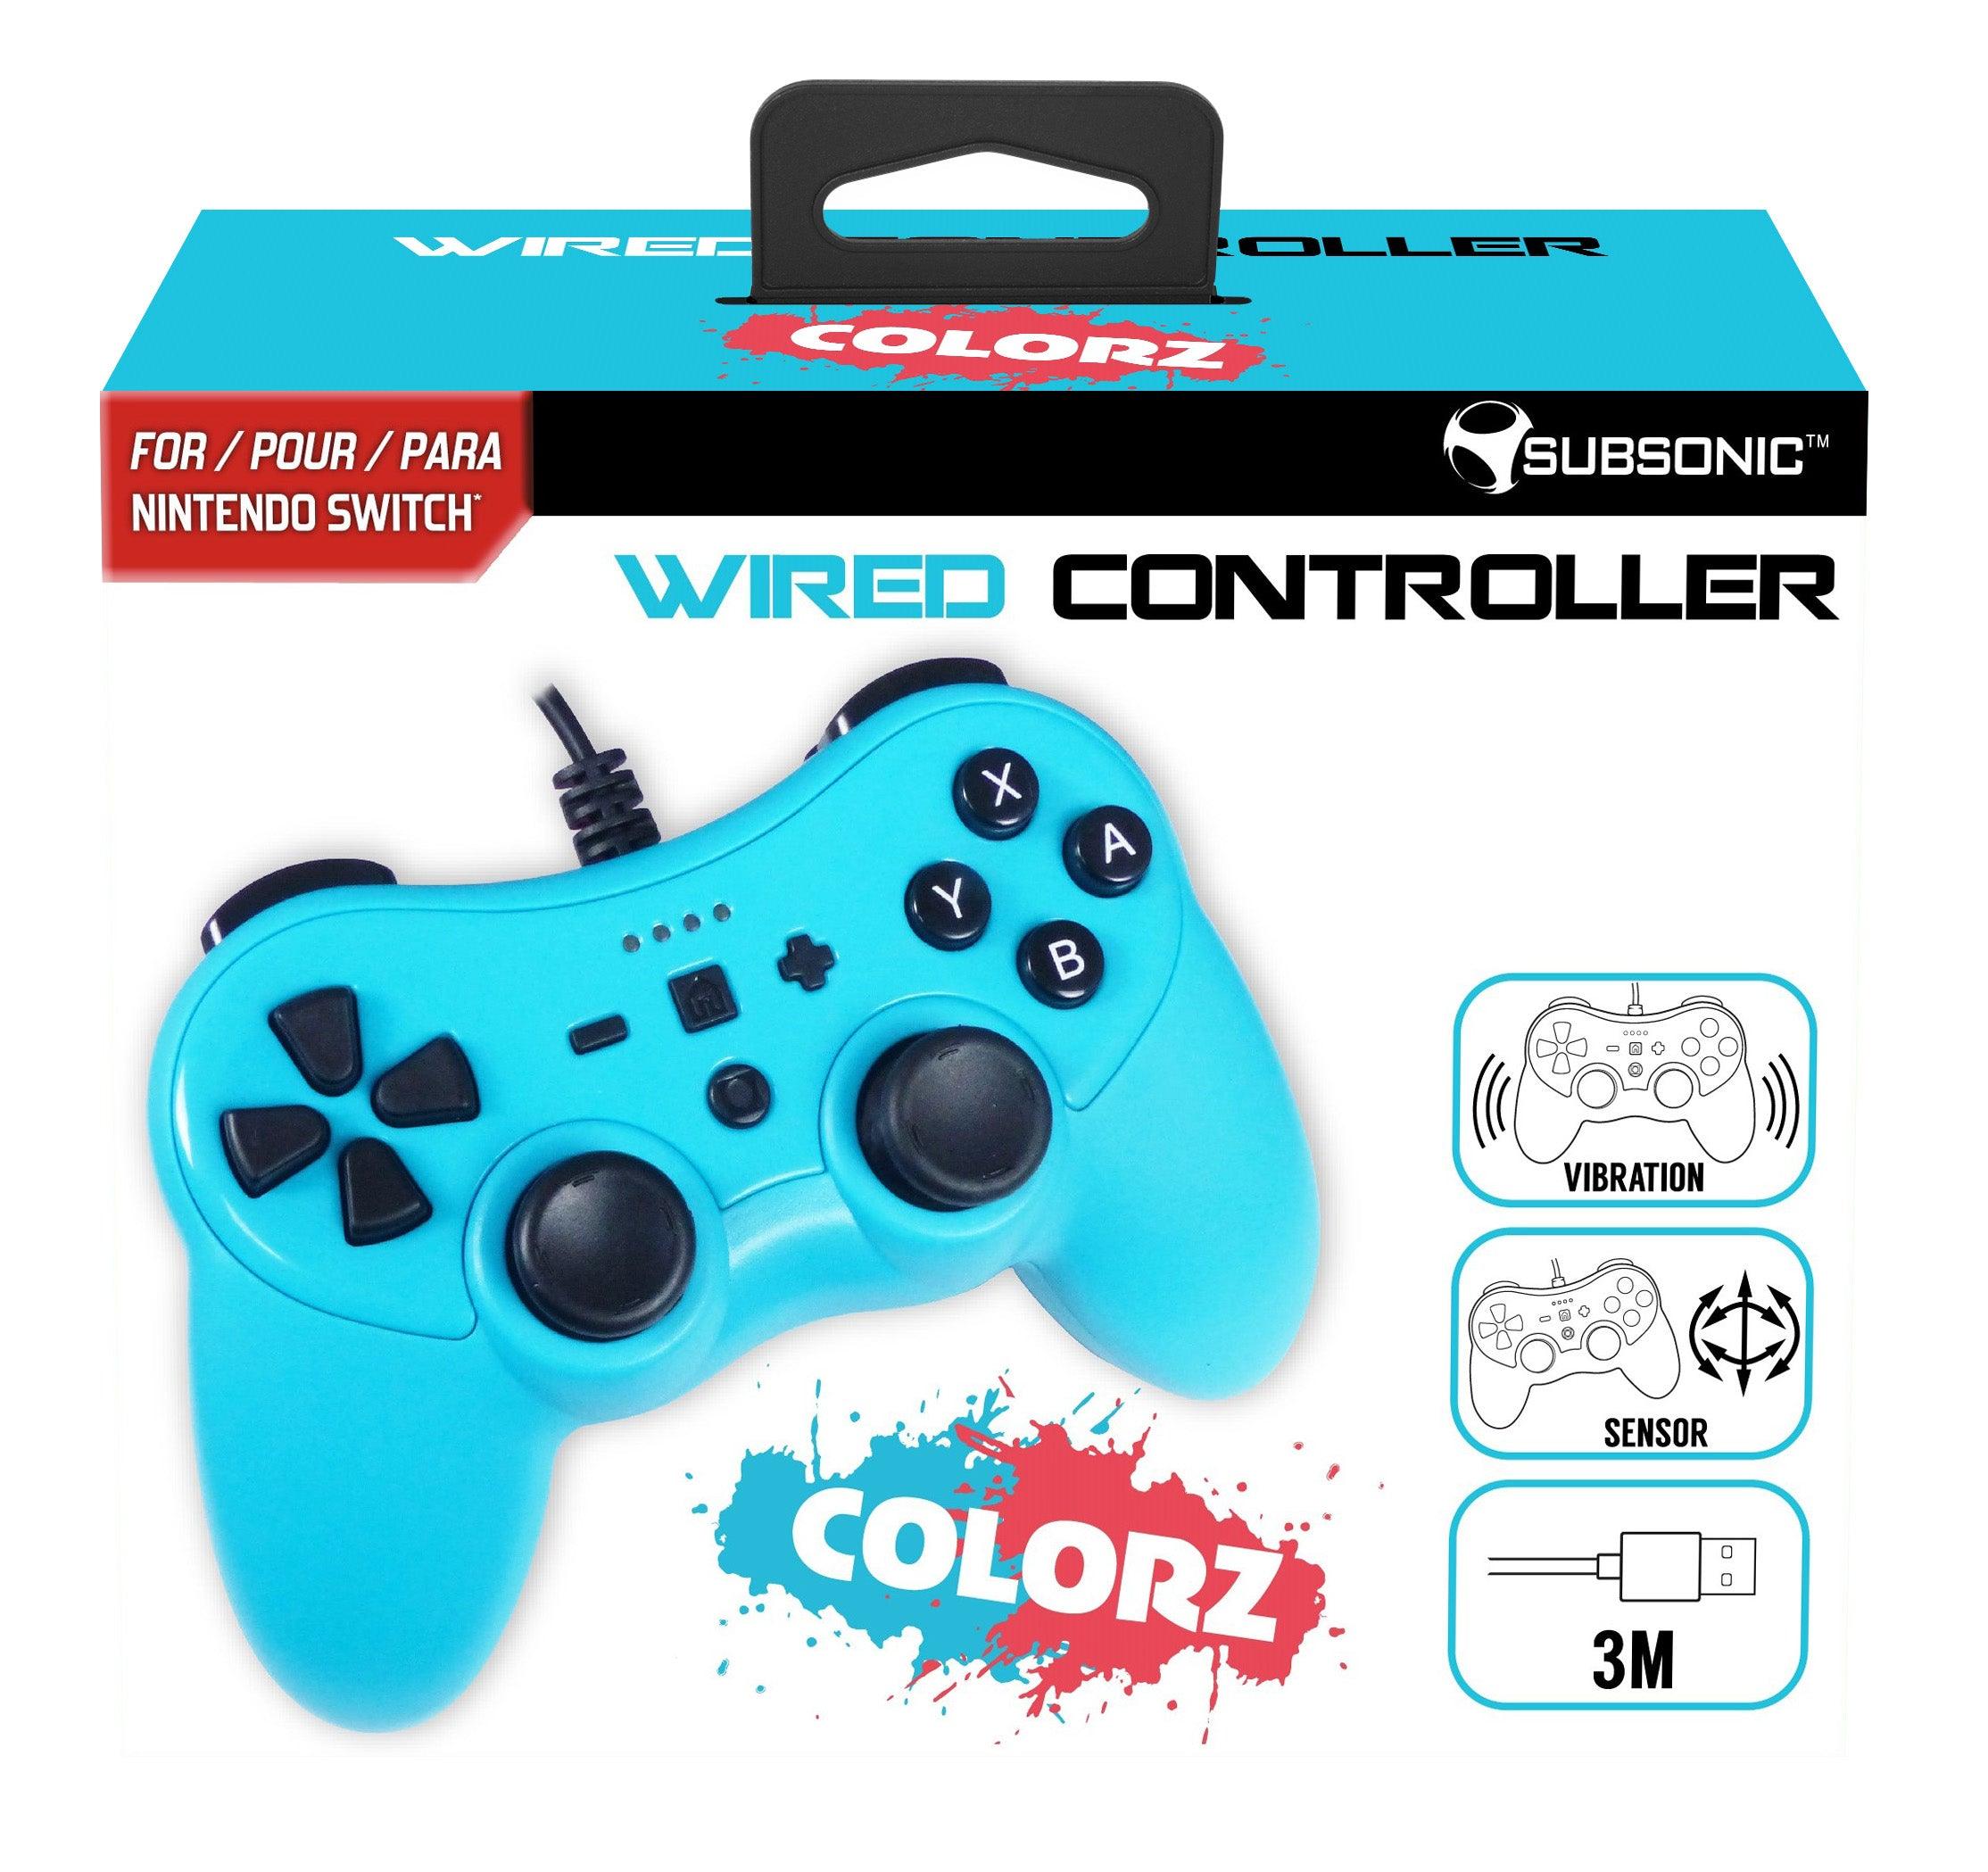 Wired Blue Switch Controller - Want a New Gadget